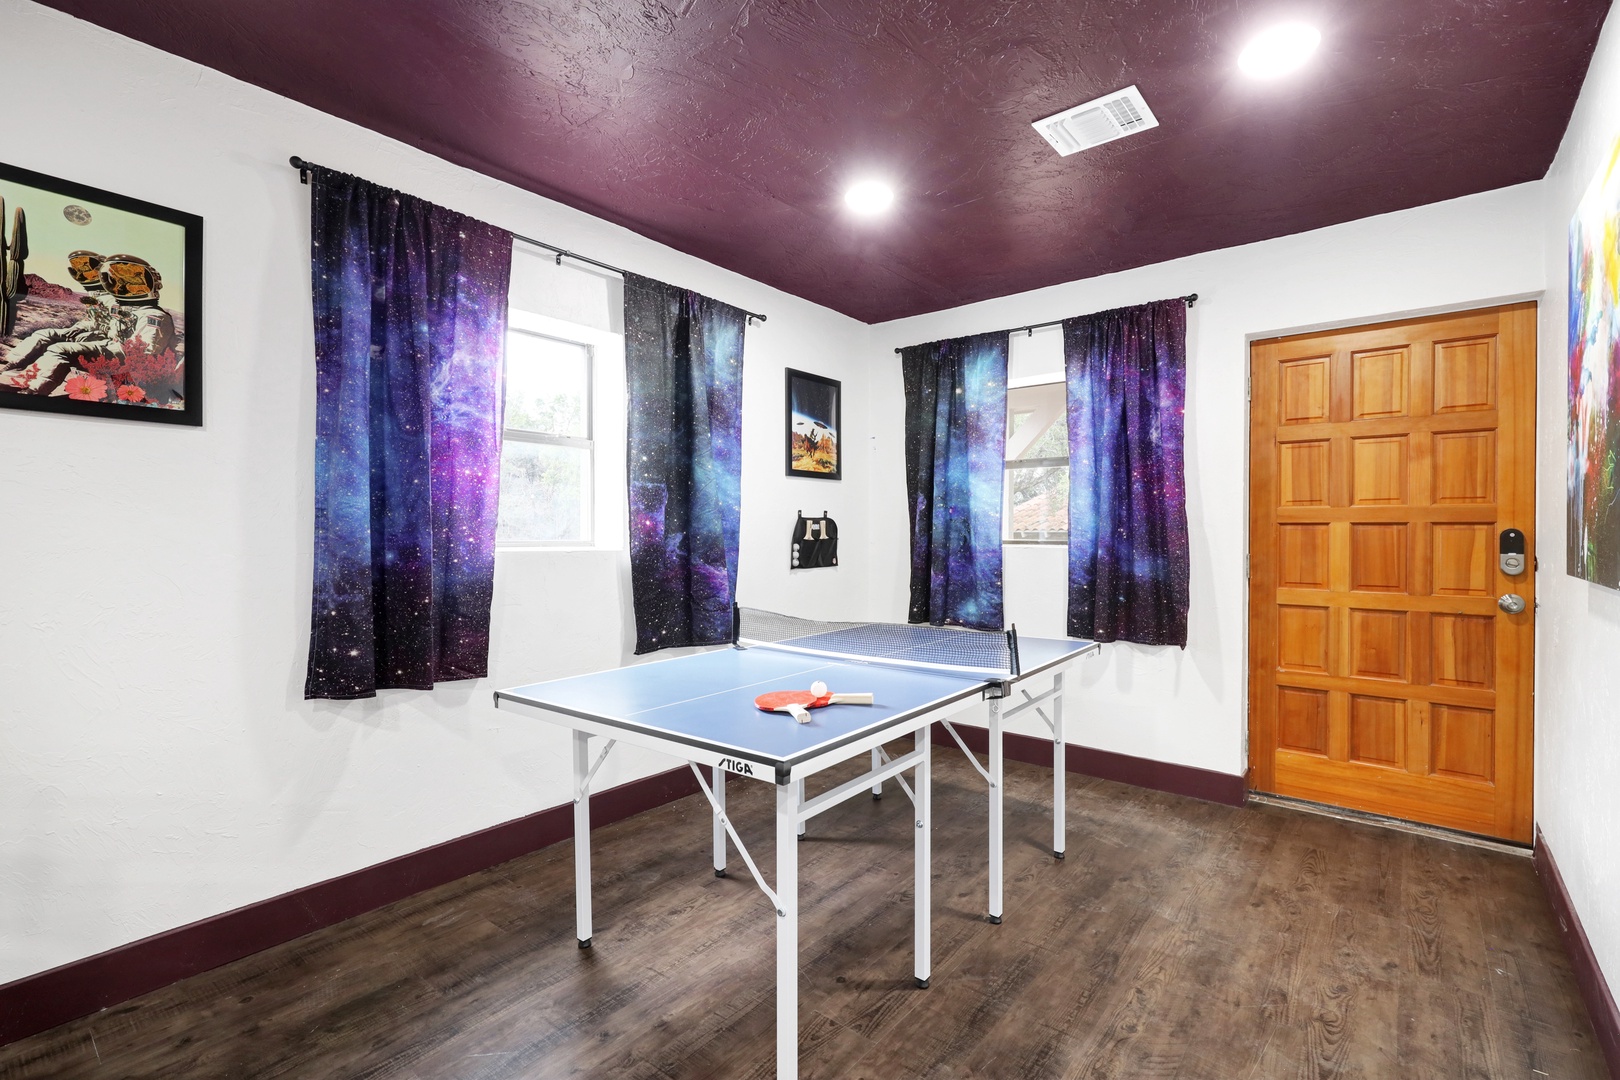 Feeling competitive? Battle it out with a round of ping pong #GameOn